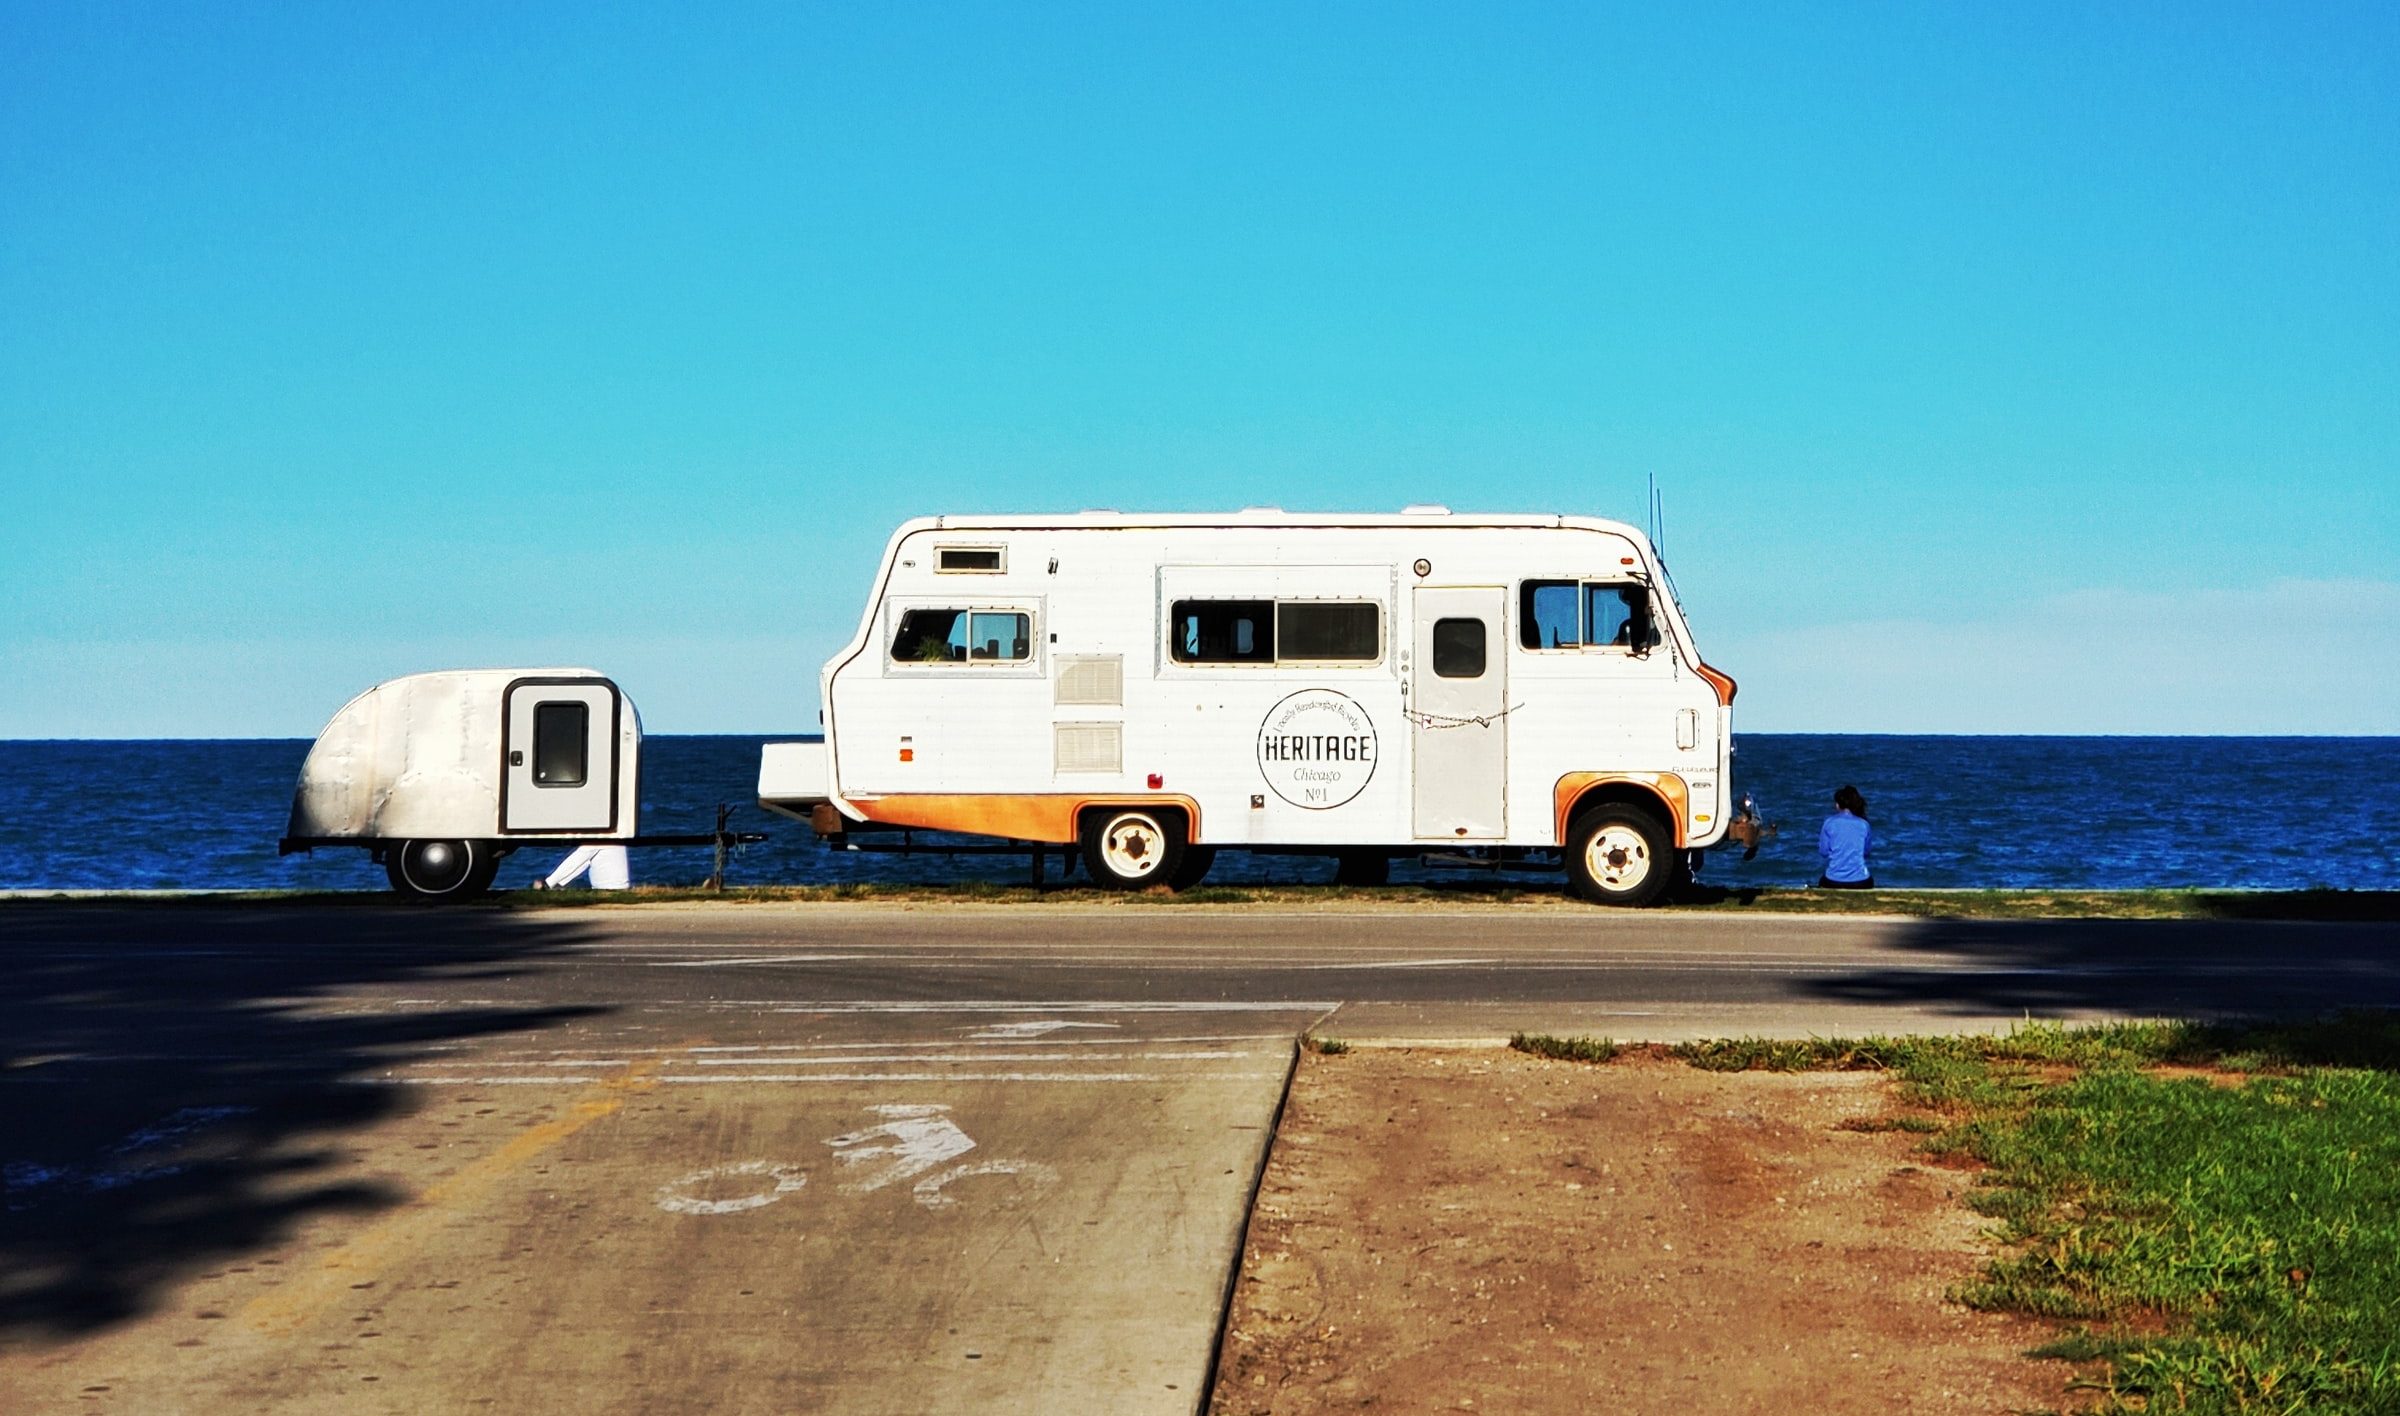 Beginners guide to driving a caravan. Caravan parked by the water